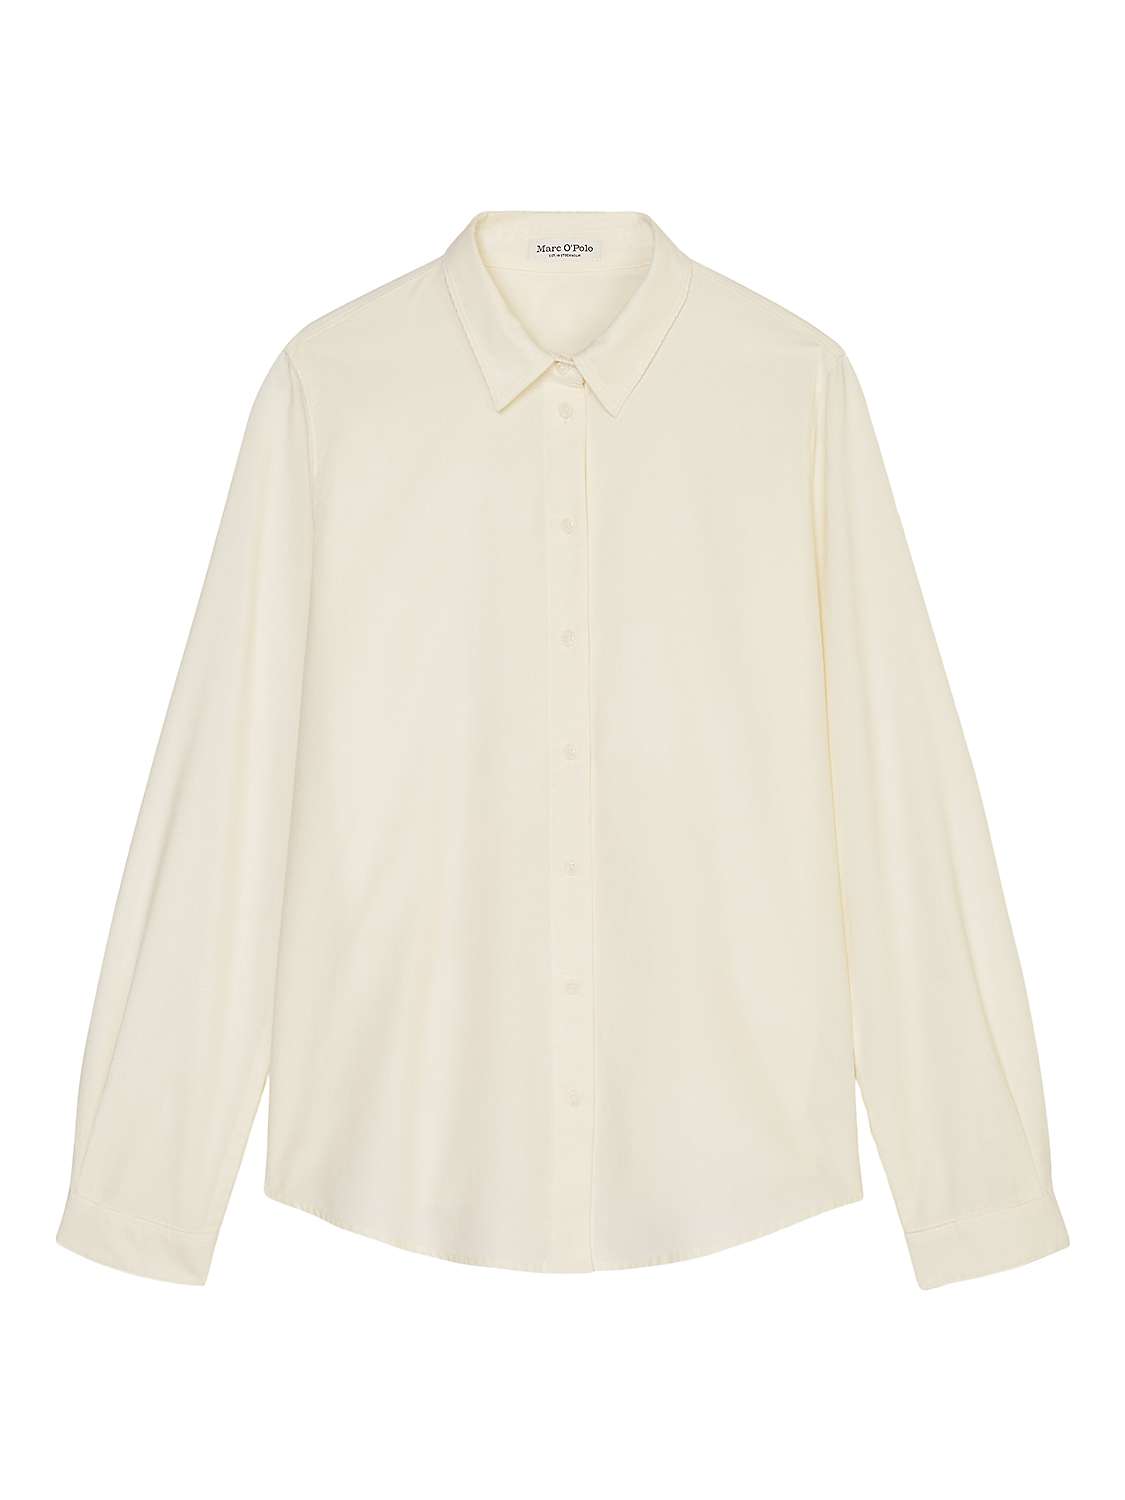 Buy Marc O'Polo Fine Corduroy Long Sleeve Blouse, White Online at johnlewis.com